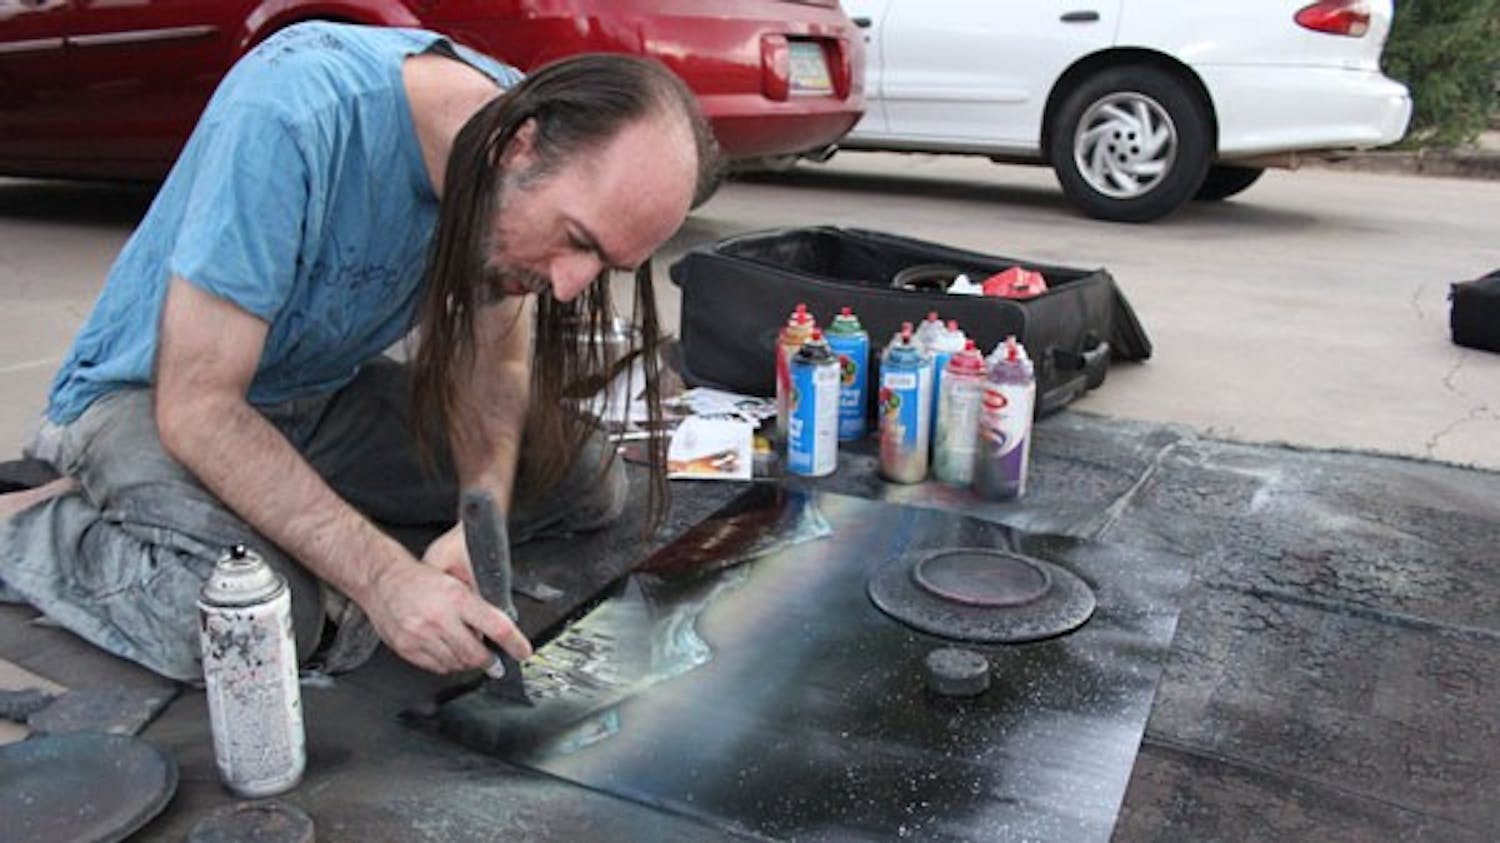 Visual artist Bruce Cormier has been painting on Mill Avenue for years. He’s a conversation-starter for frequent visitors of the street and is known for his unique style of using spray paint to create a space landscape. (Photo by Ana Ramirez)